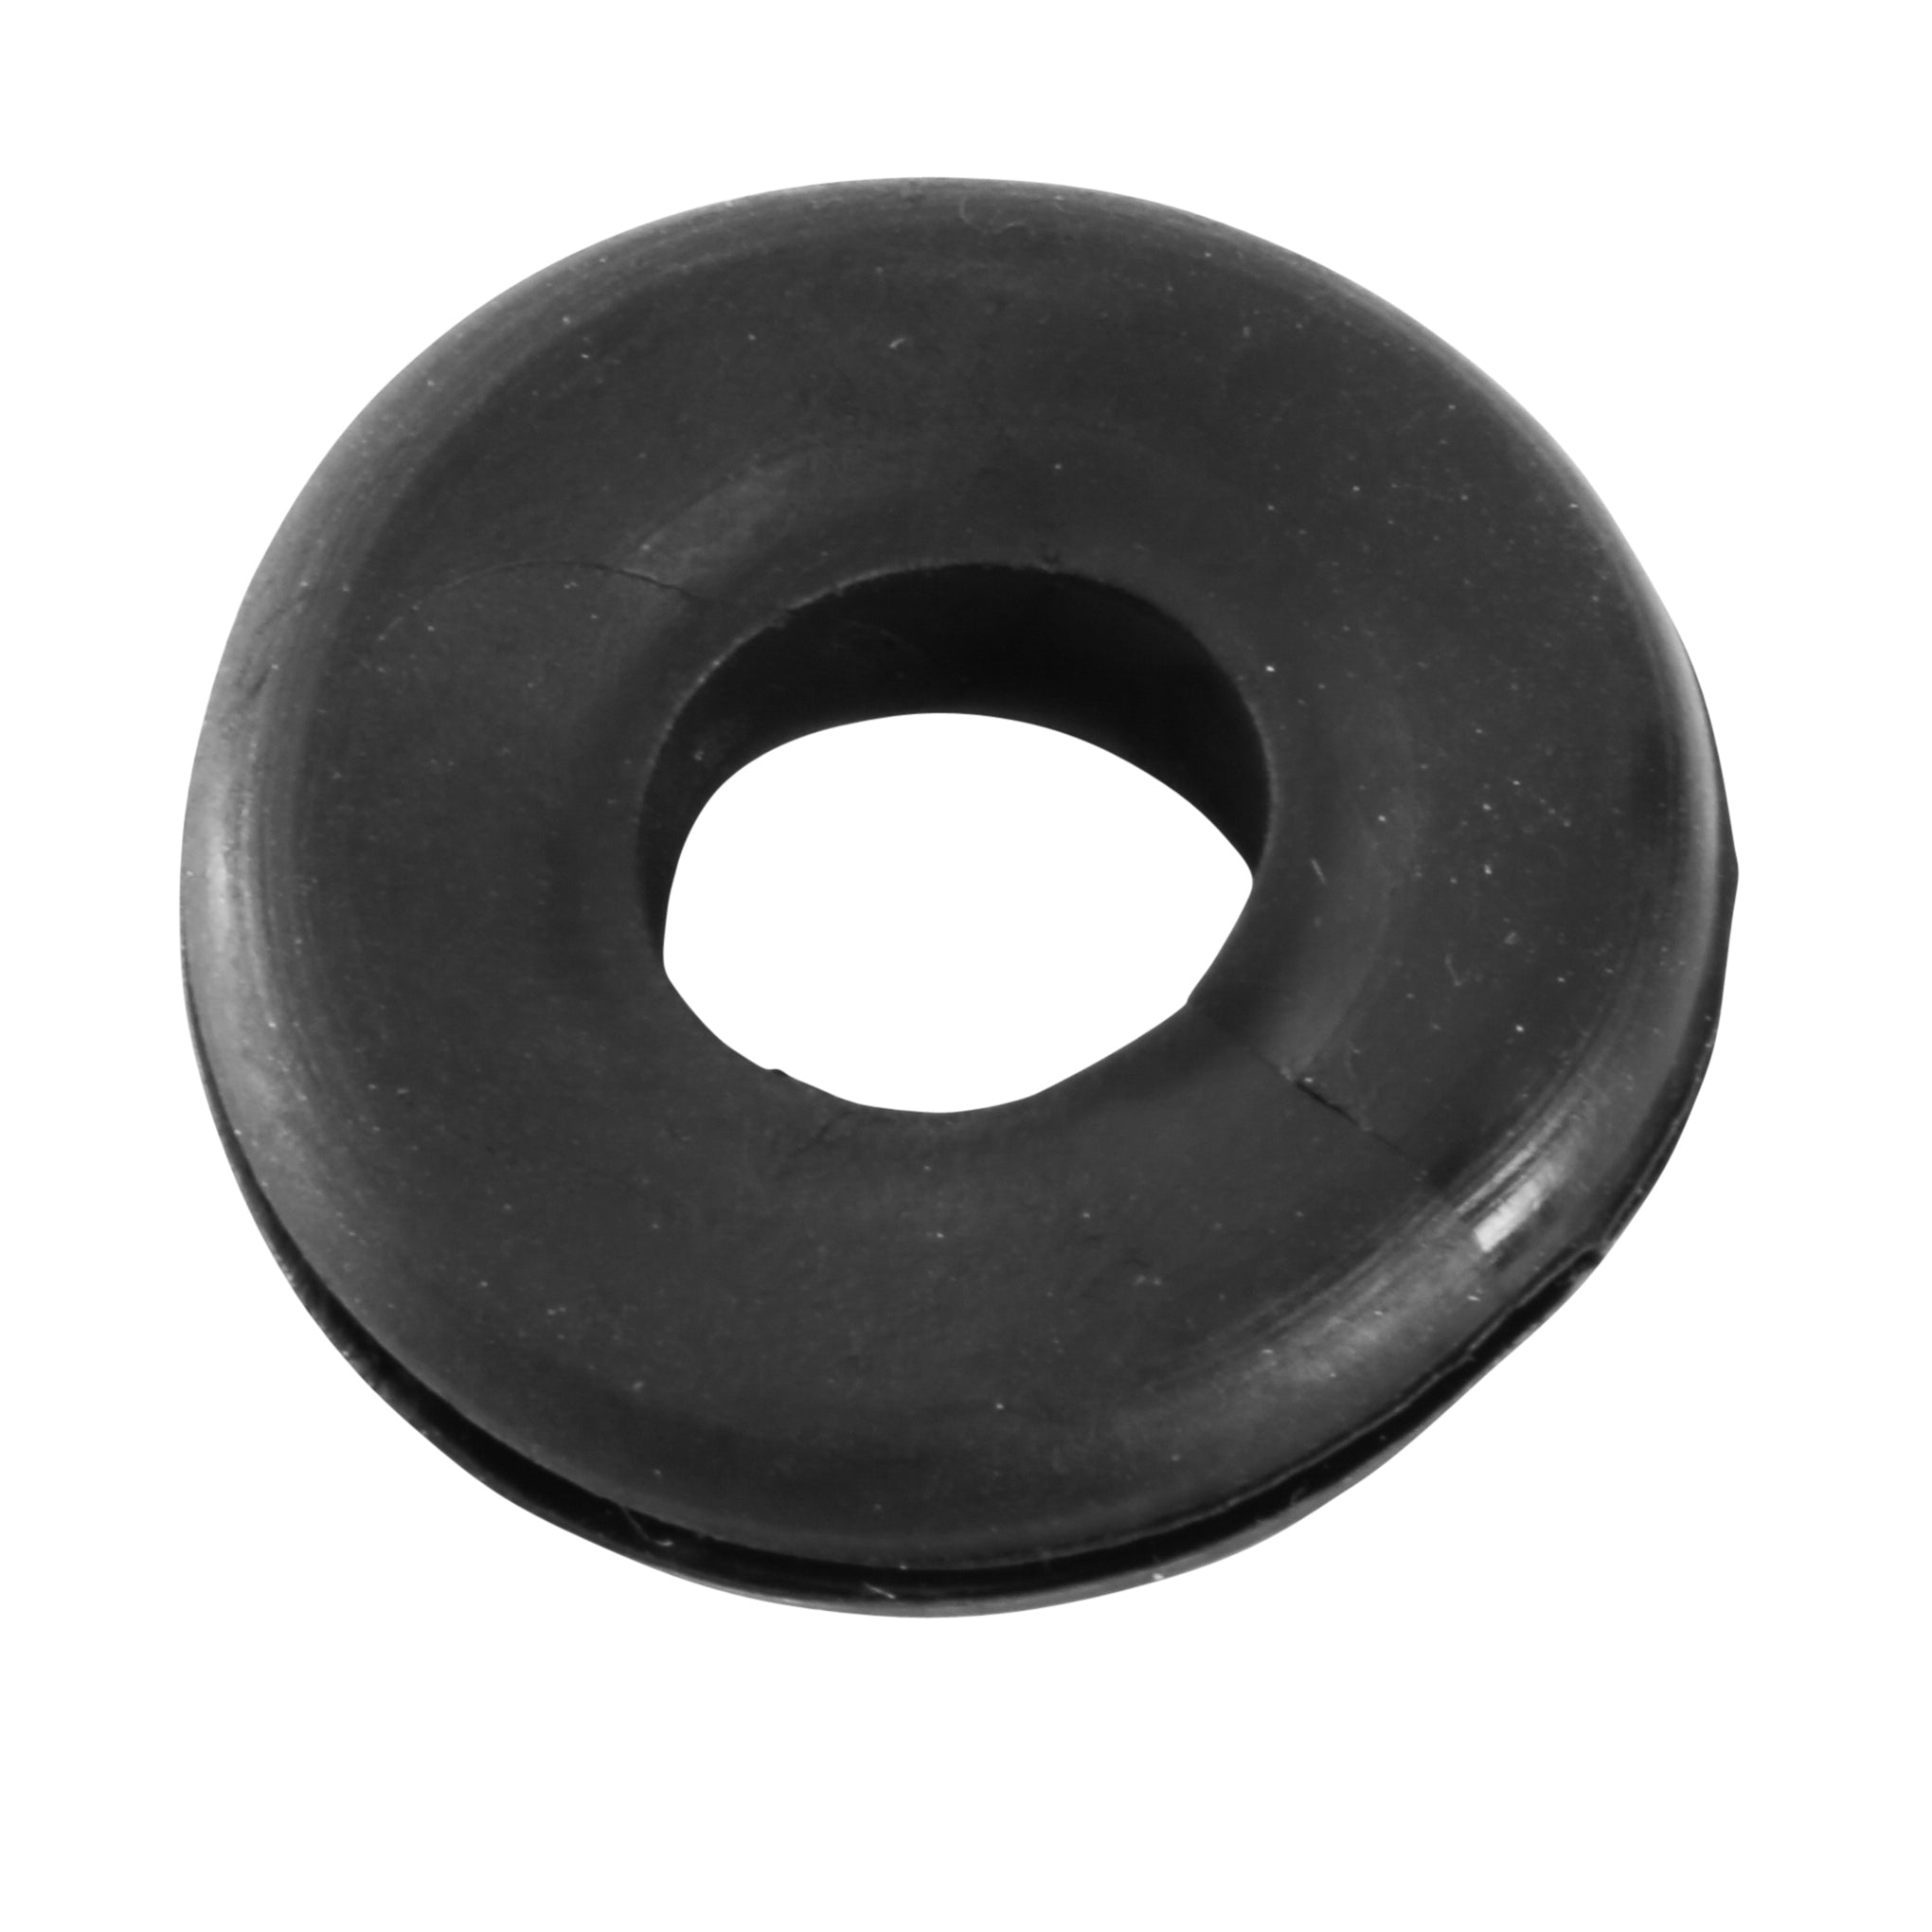 Windshield Wiper Hose Grommet for Firewall • 1940 Ford Convertible